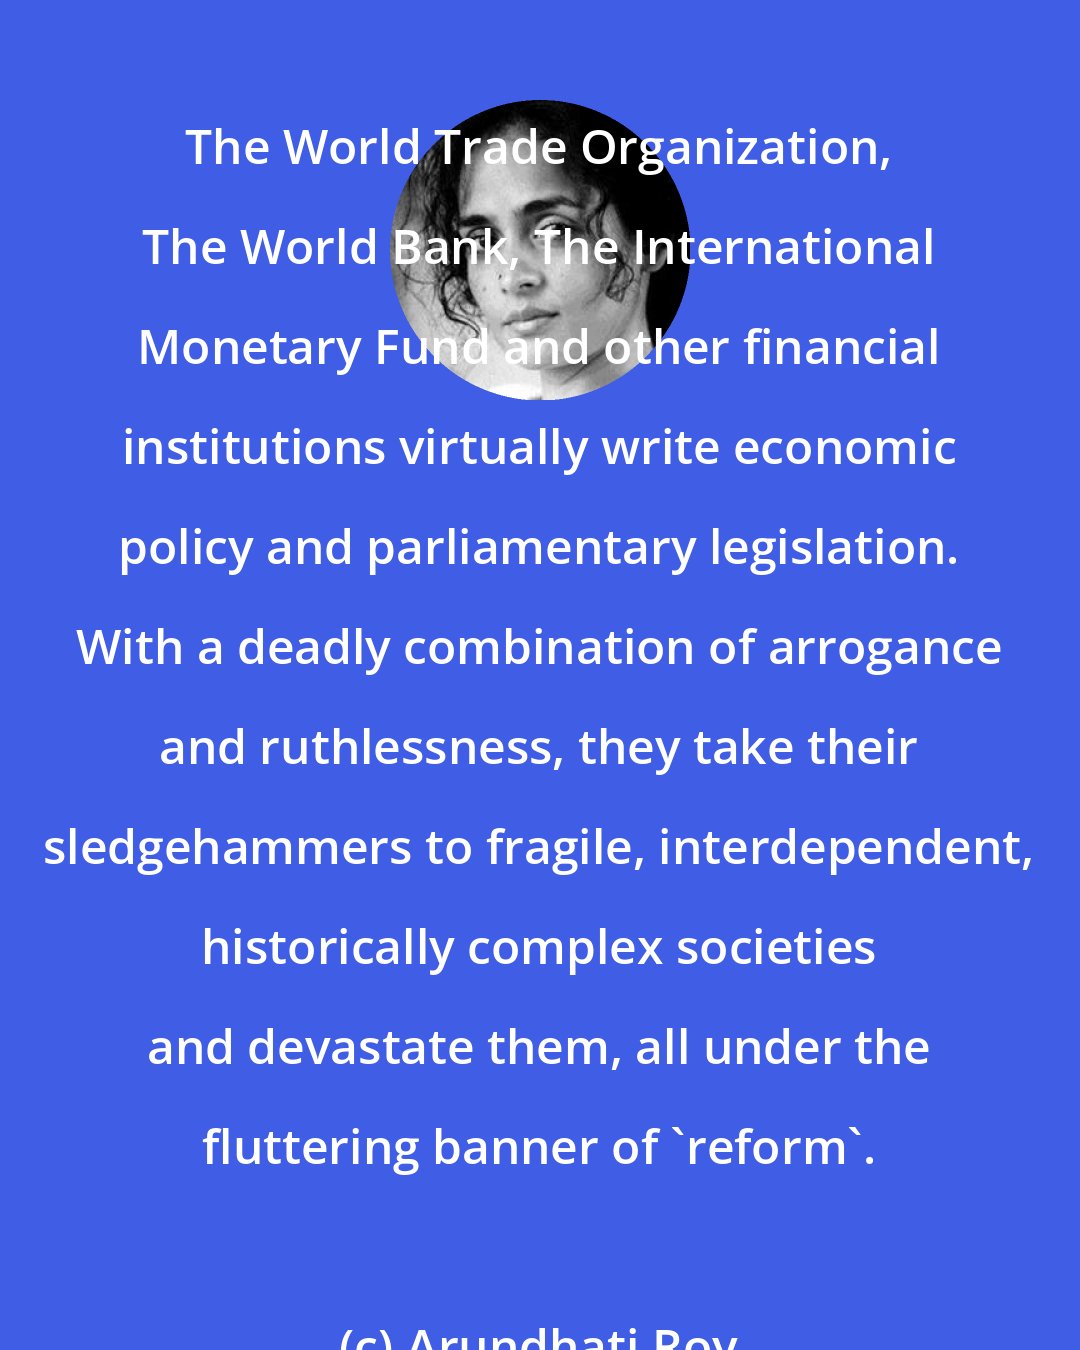 Arundhati Roy: The World Trade Organization, The World Bank, The International Monetary Fund and other financial institutions virtually write economic policy and parliamentary legislation. With a deadly combination of arrogance and ruthlessness, they take their sledgehammers to fragile, interdependent, historically complex societies and devastate them, all under the fluttering banner of 'reform'.